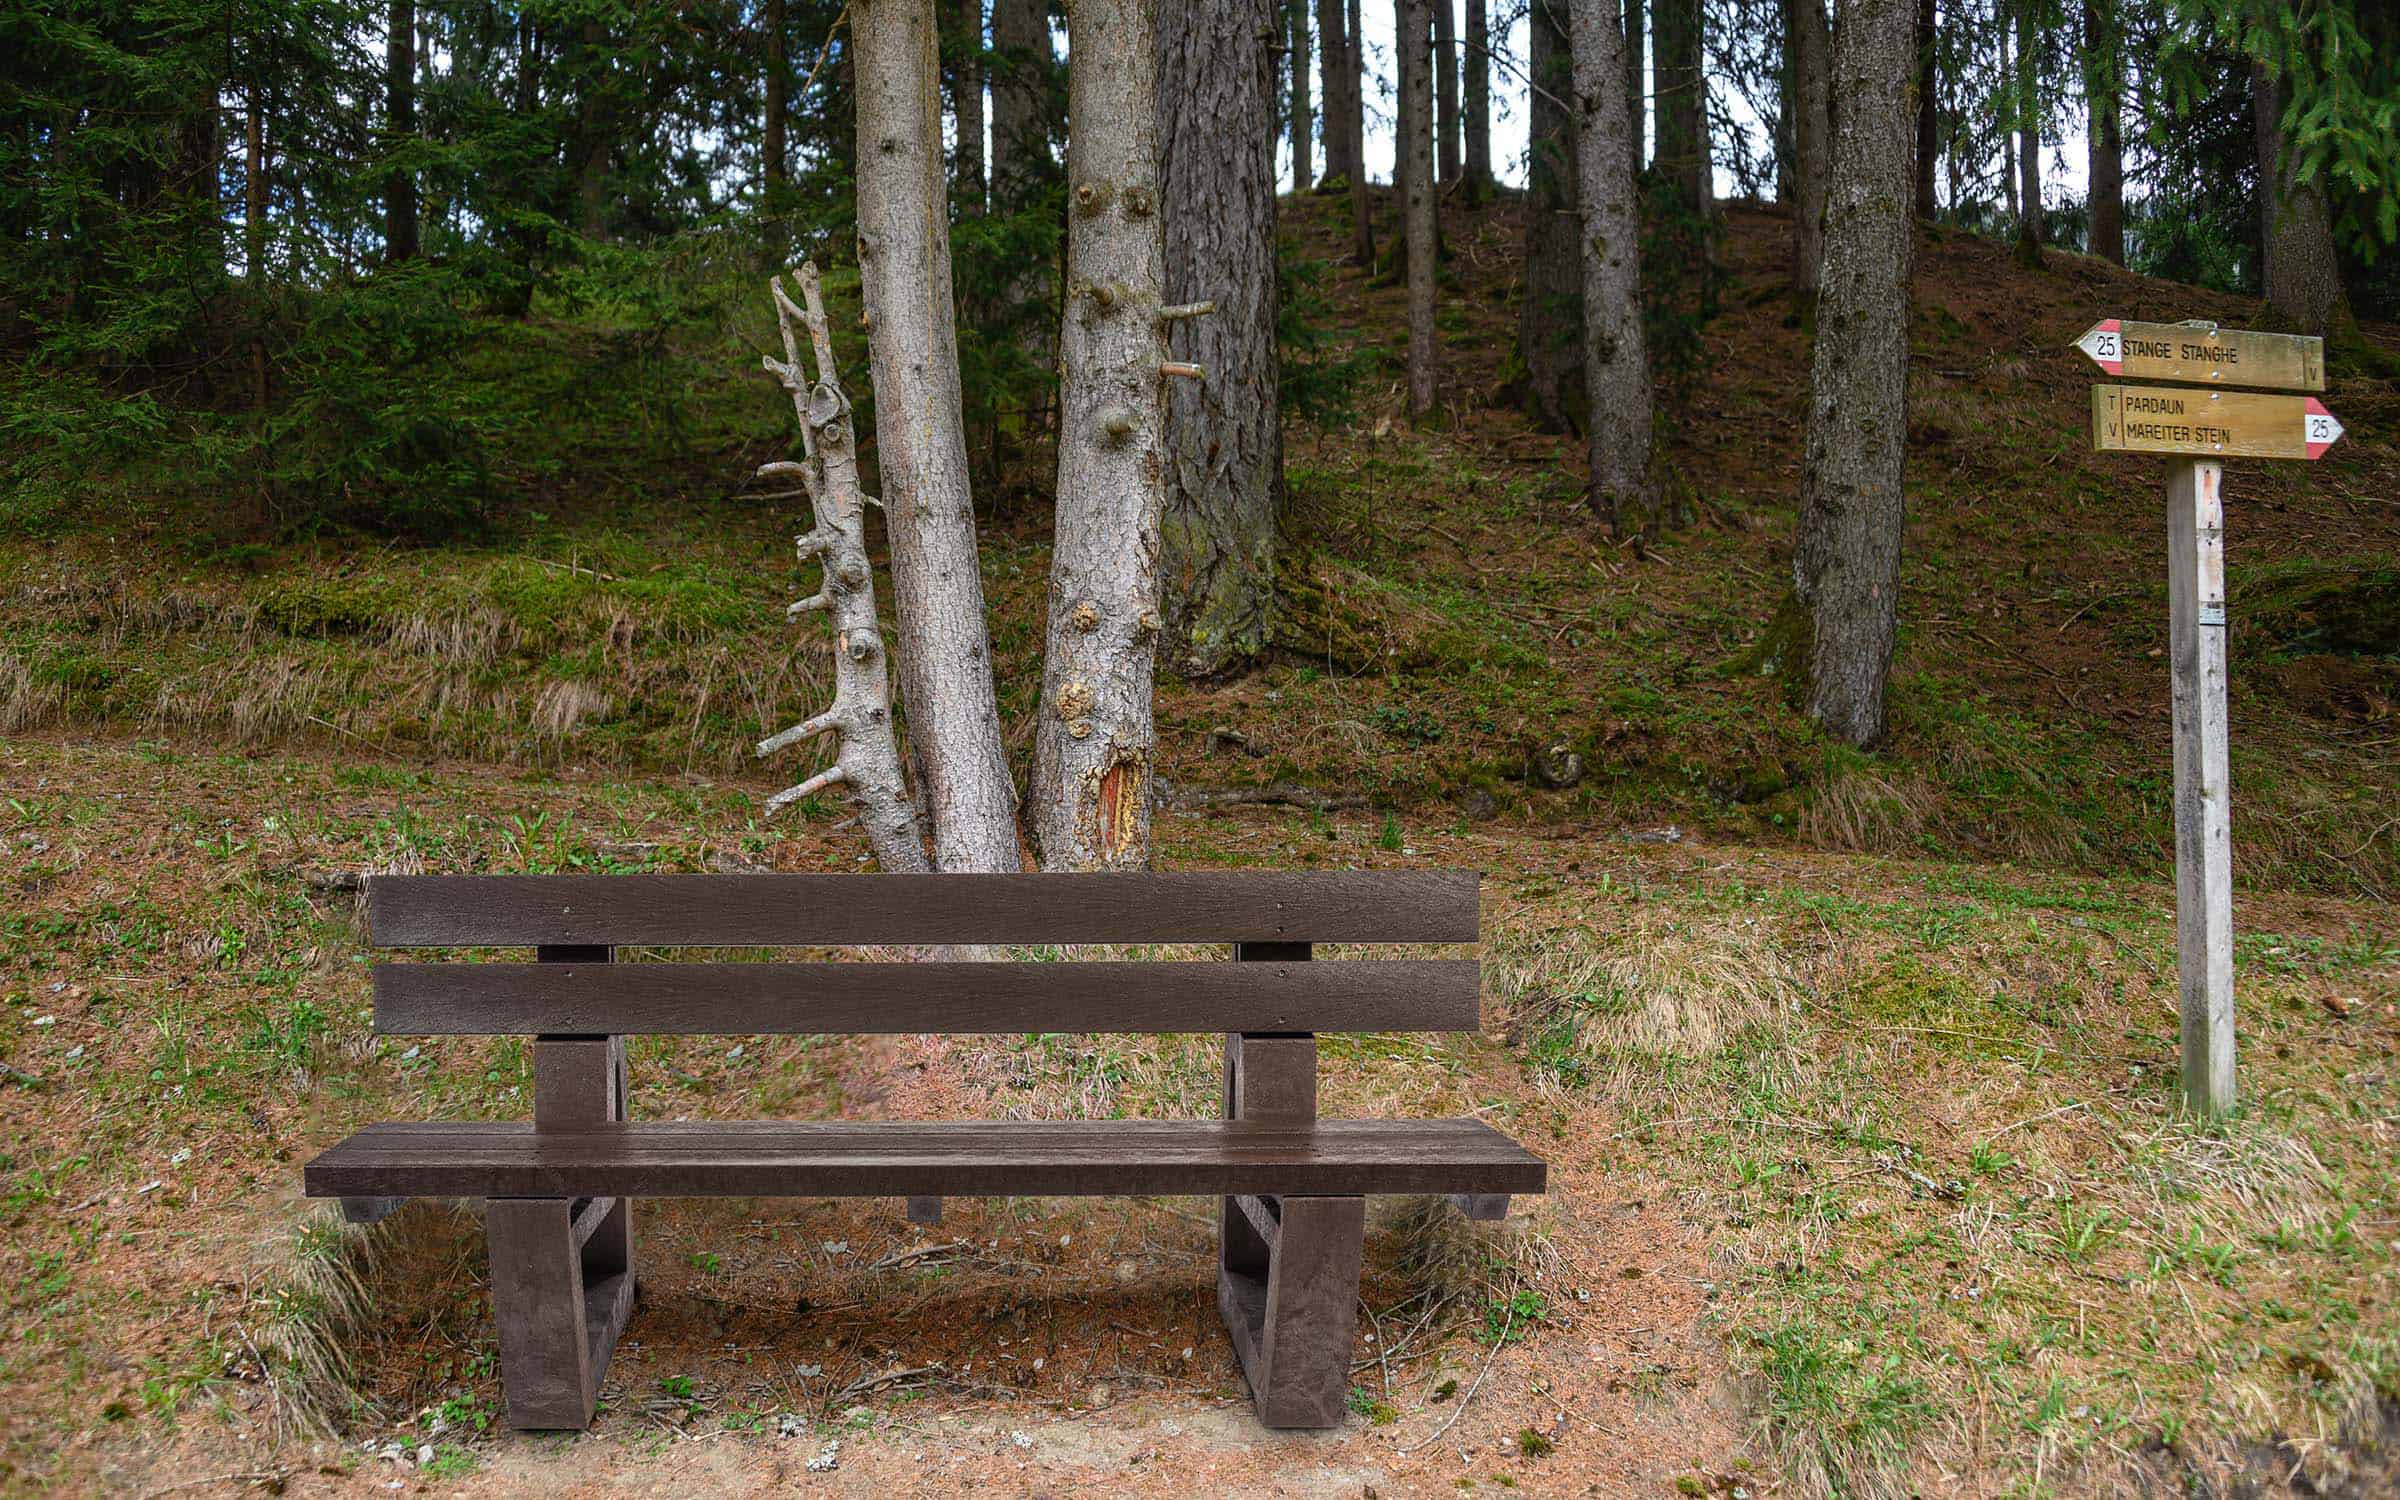 Recycled Plastic Memorial Benches - Moulded Bench